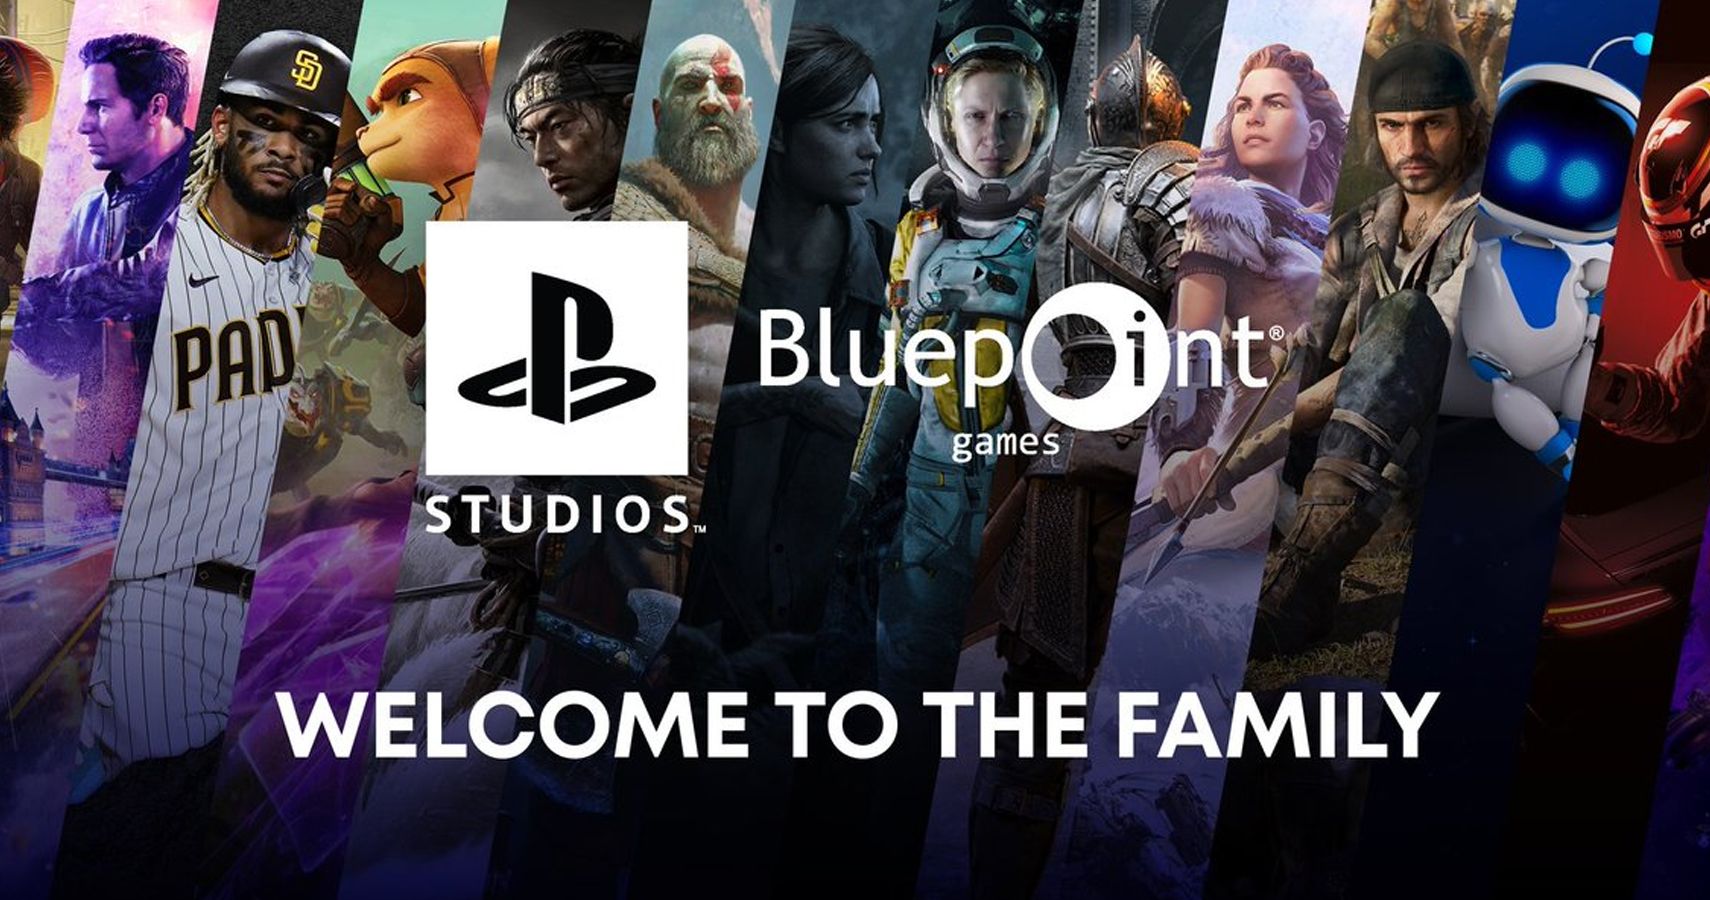 PlayStation, Bluepoint Games